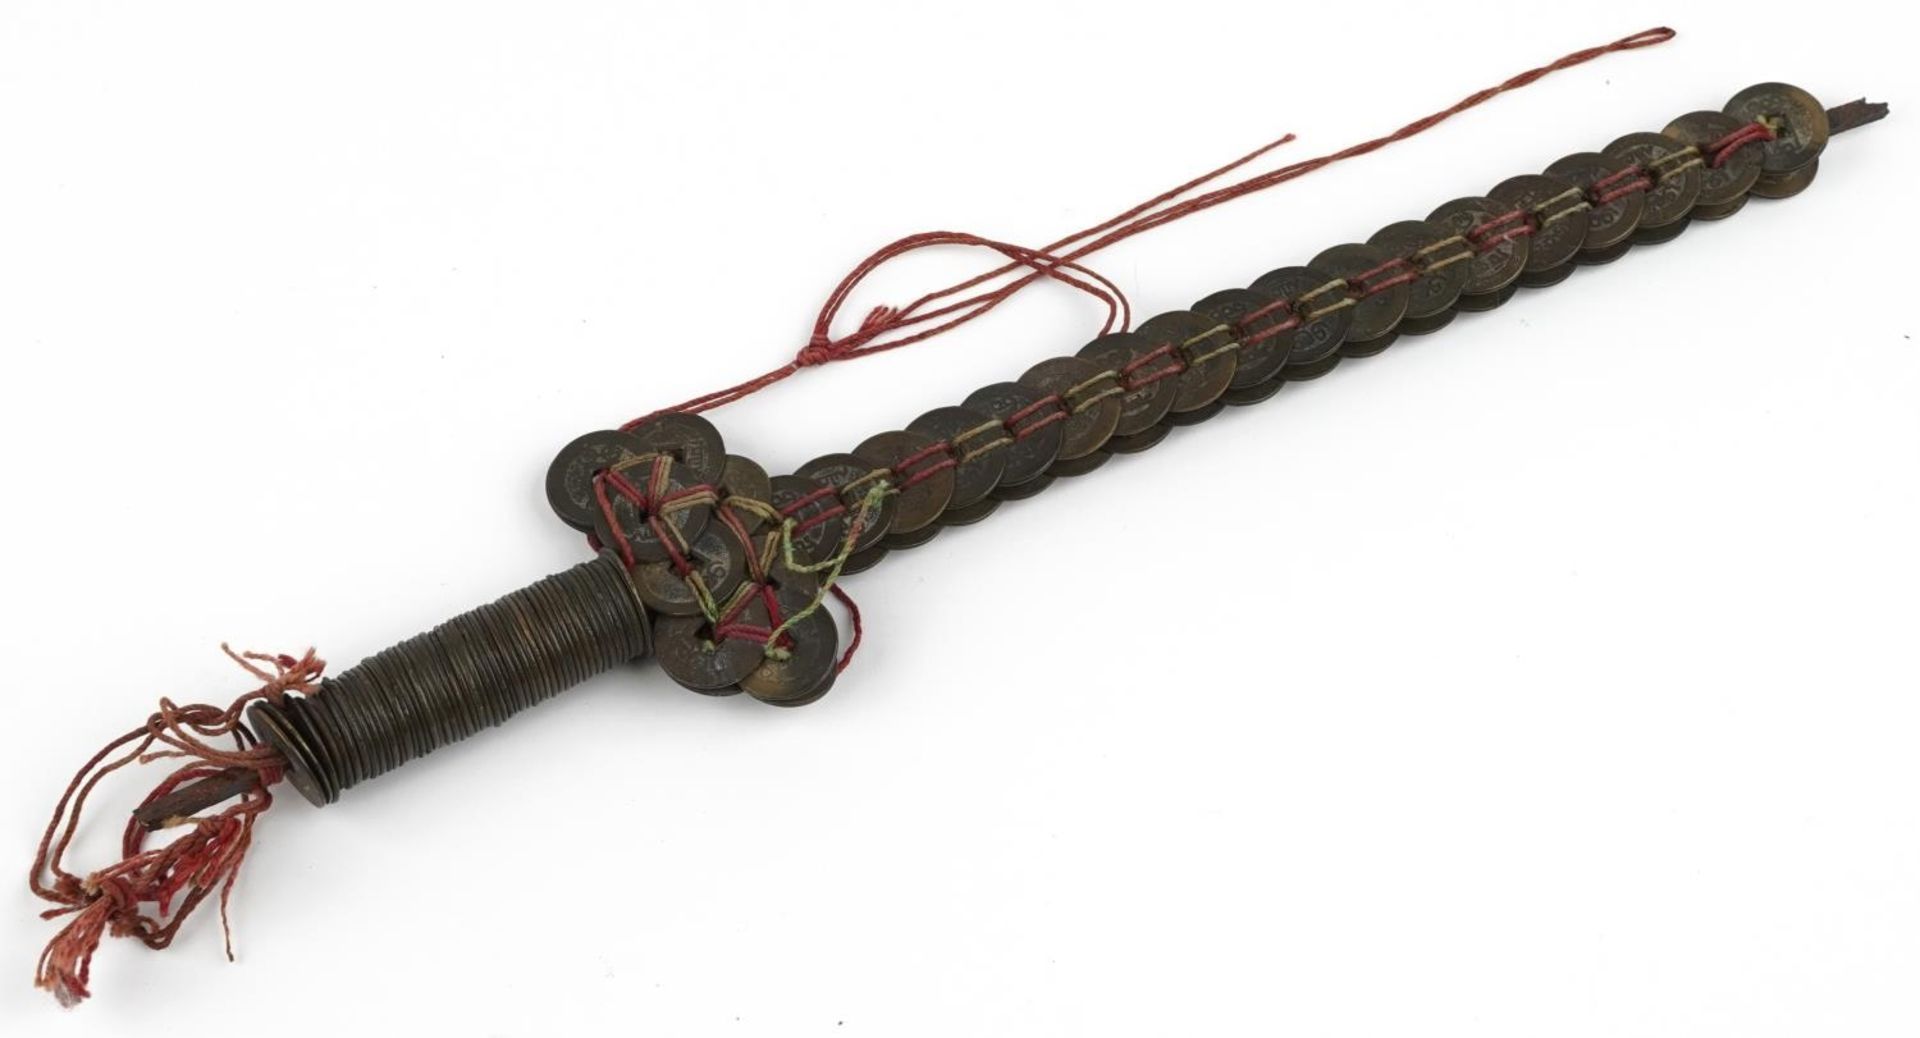 Chinese sword formed of cash coins, 41cm in length - Image 3 of 3